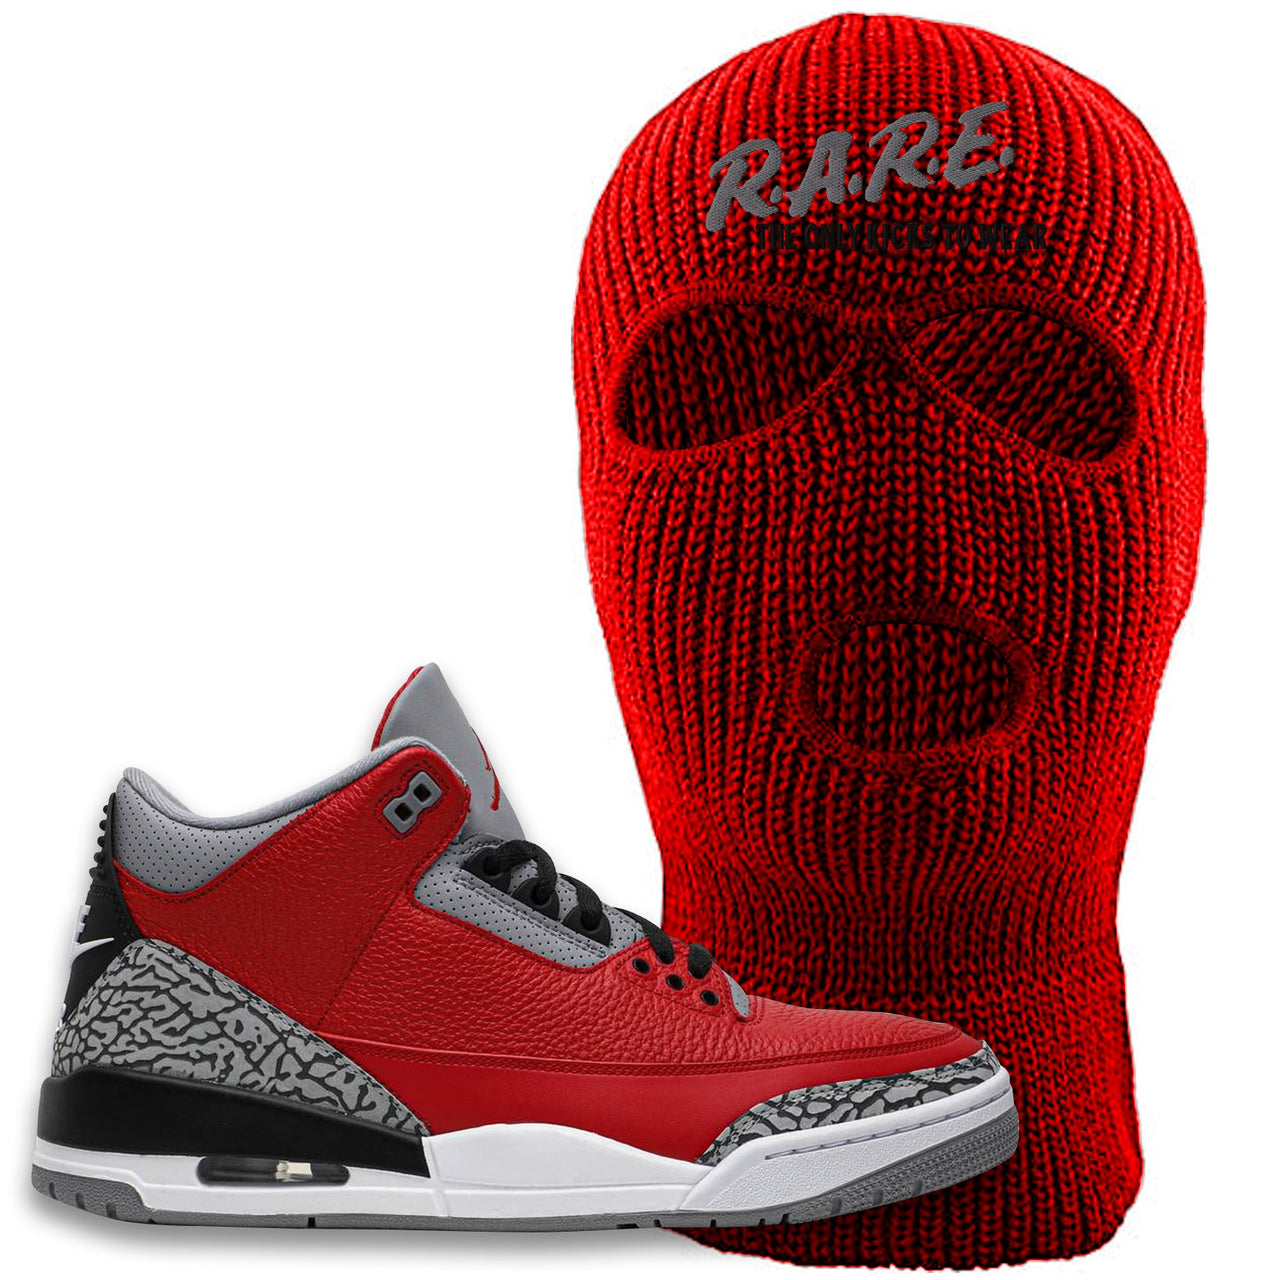 Chicago Exclusive Jordan 3 Cement Sneaker Red Ski Mask | Winter Mask to match Jordan 3 All Star Red Cement Shoes | Rare